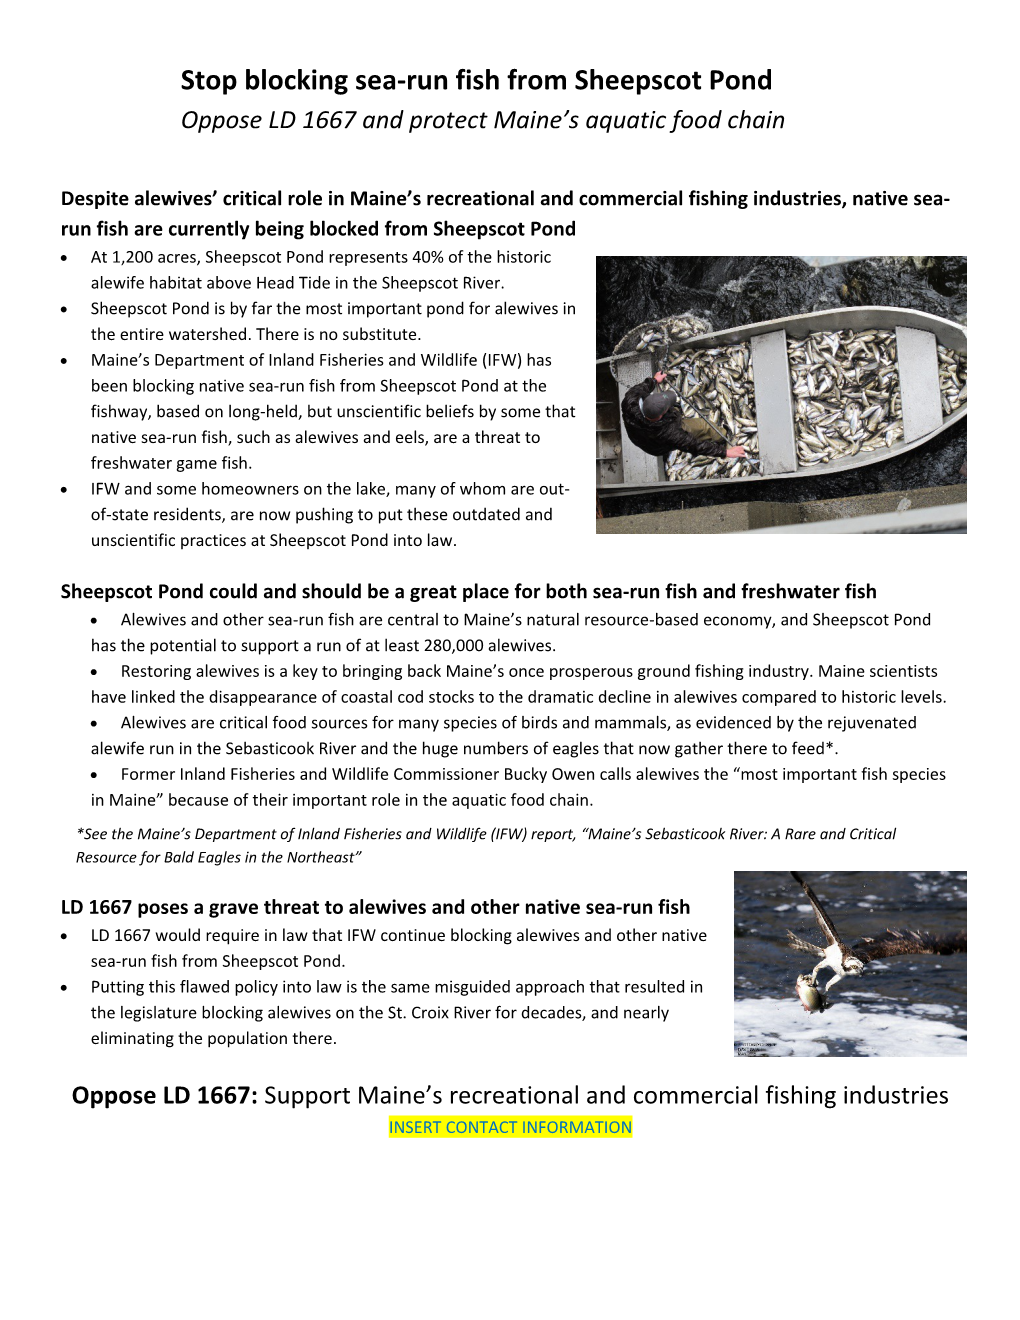 Oppose LD 1667 and Protect Maine S Aquatic Food Chain